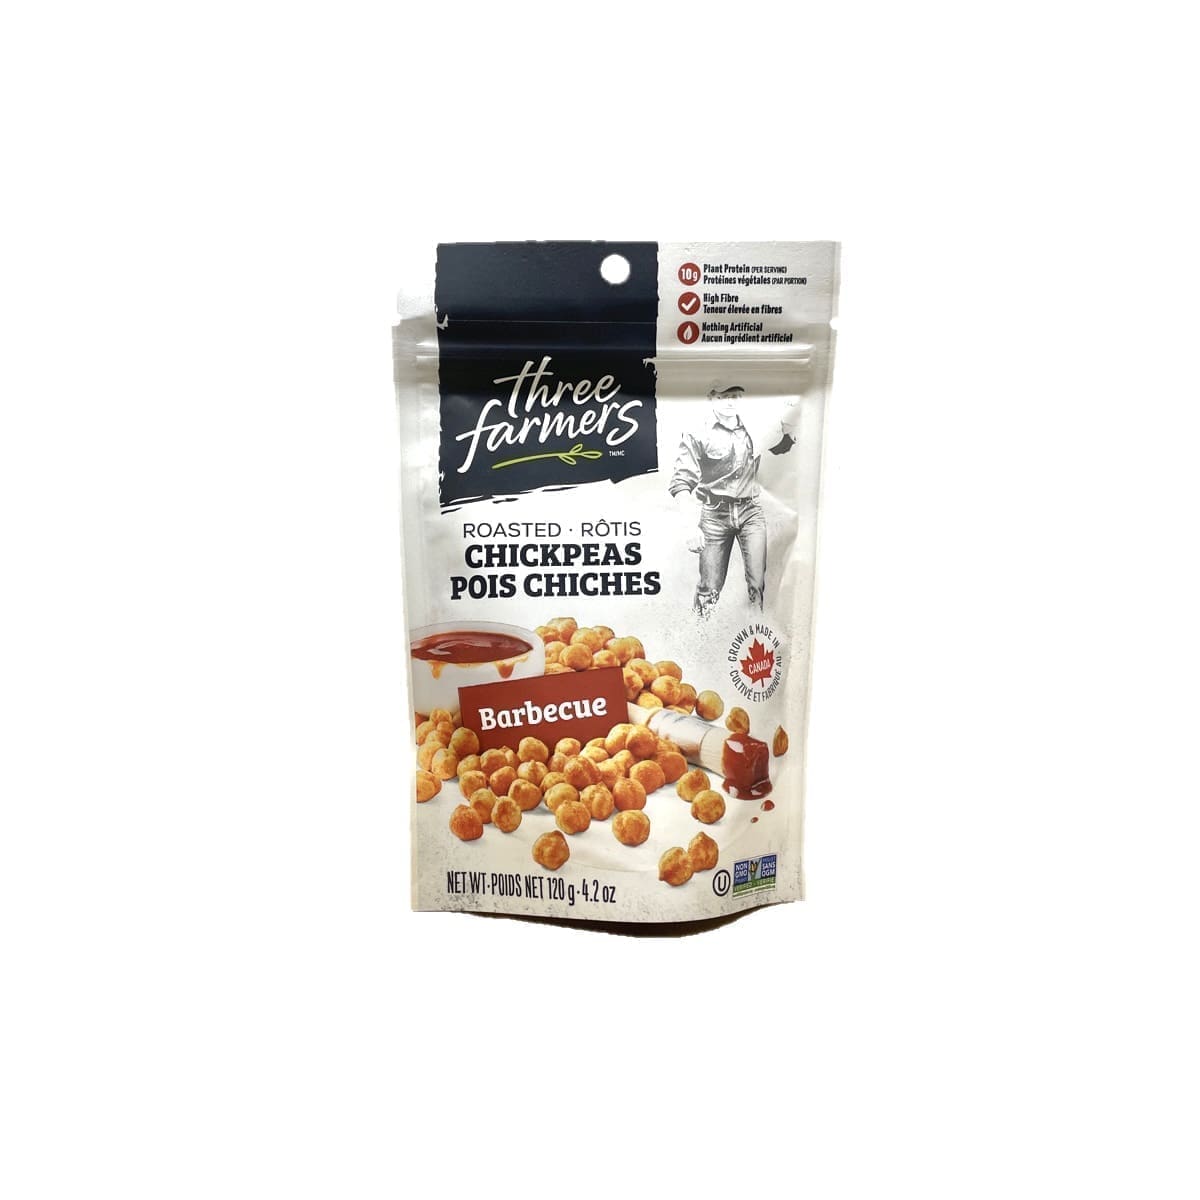 Three Farmers Roasted Chickpeas Barbecue (120g)